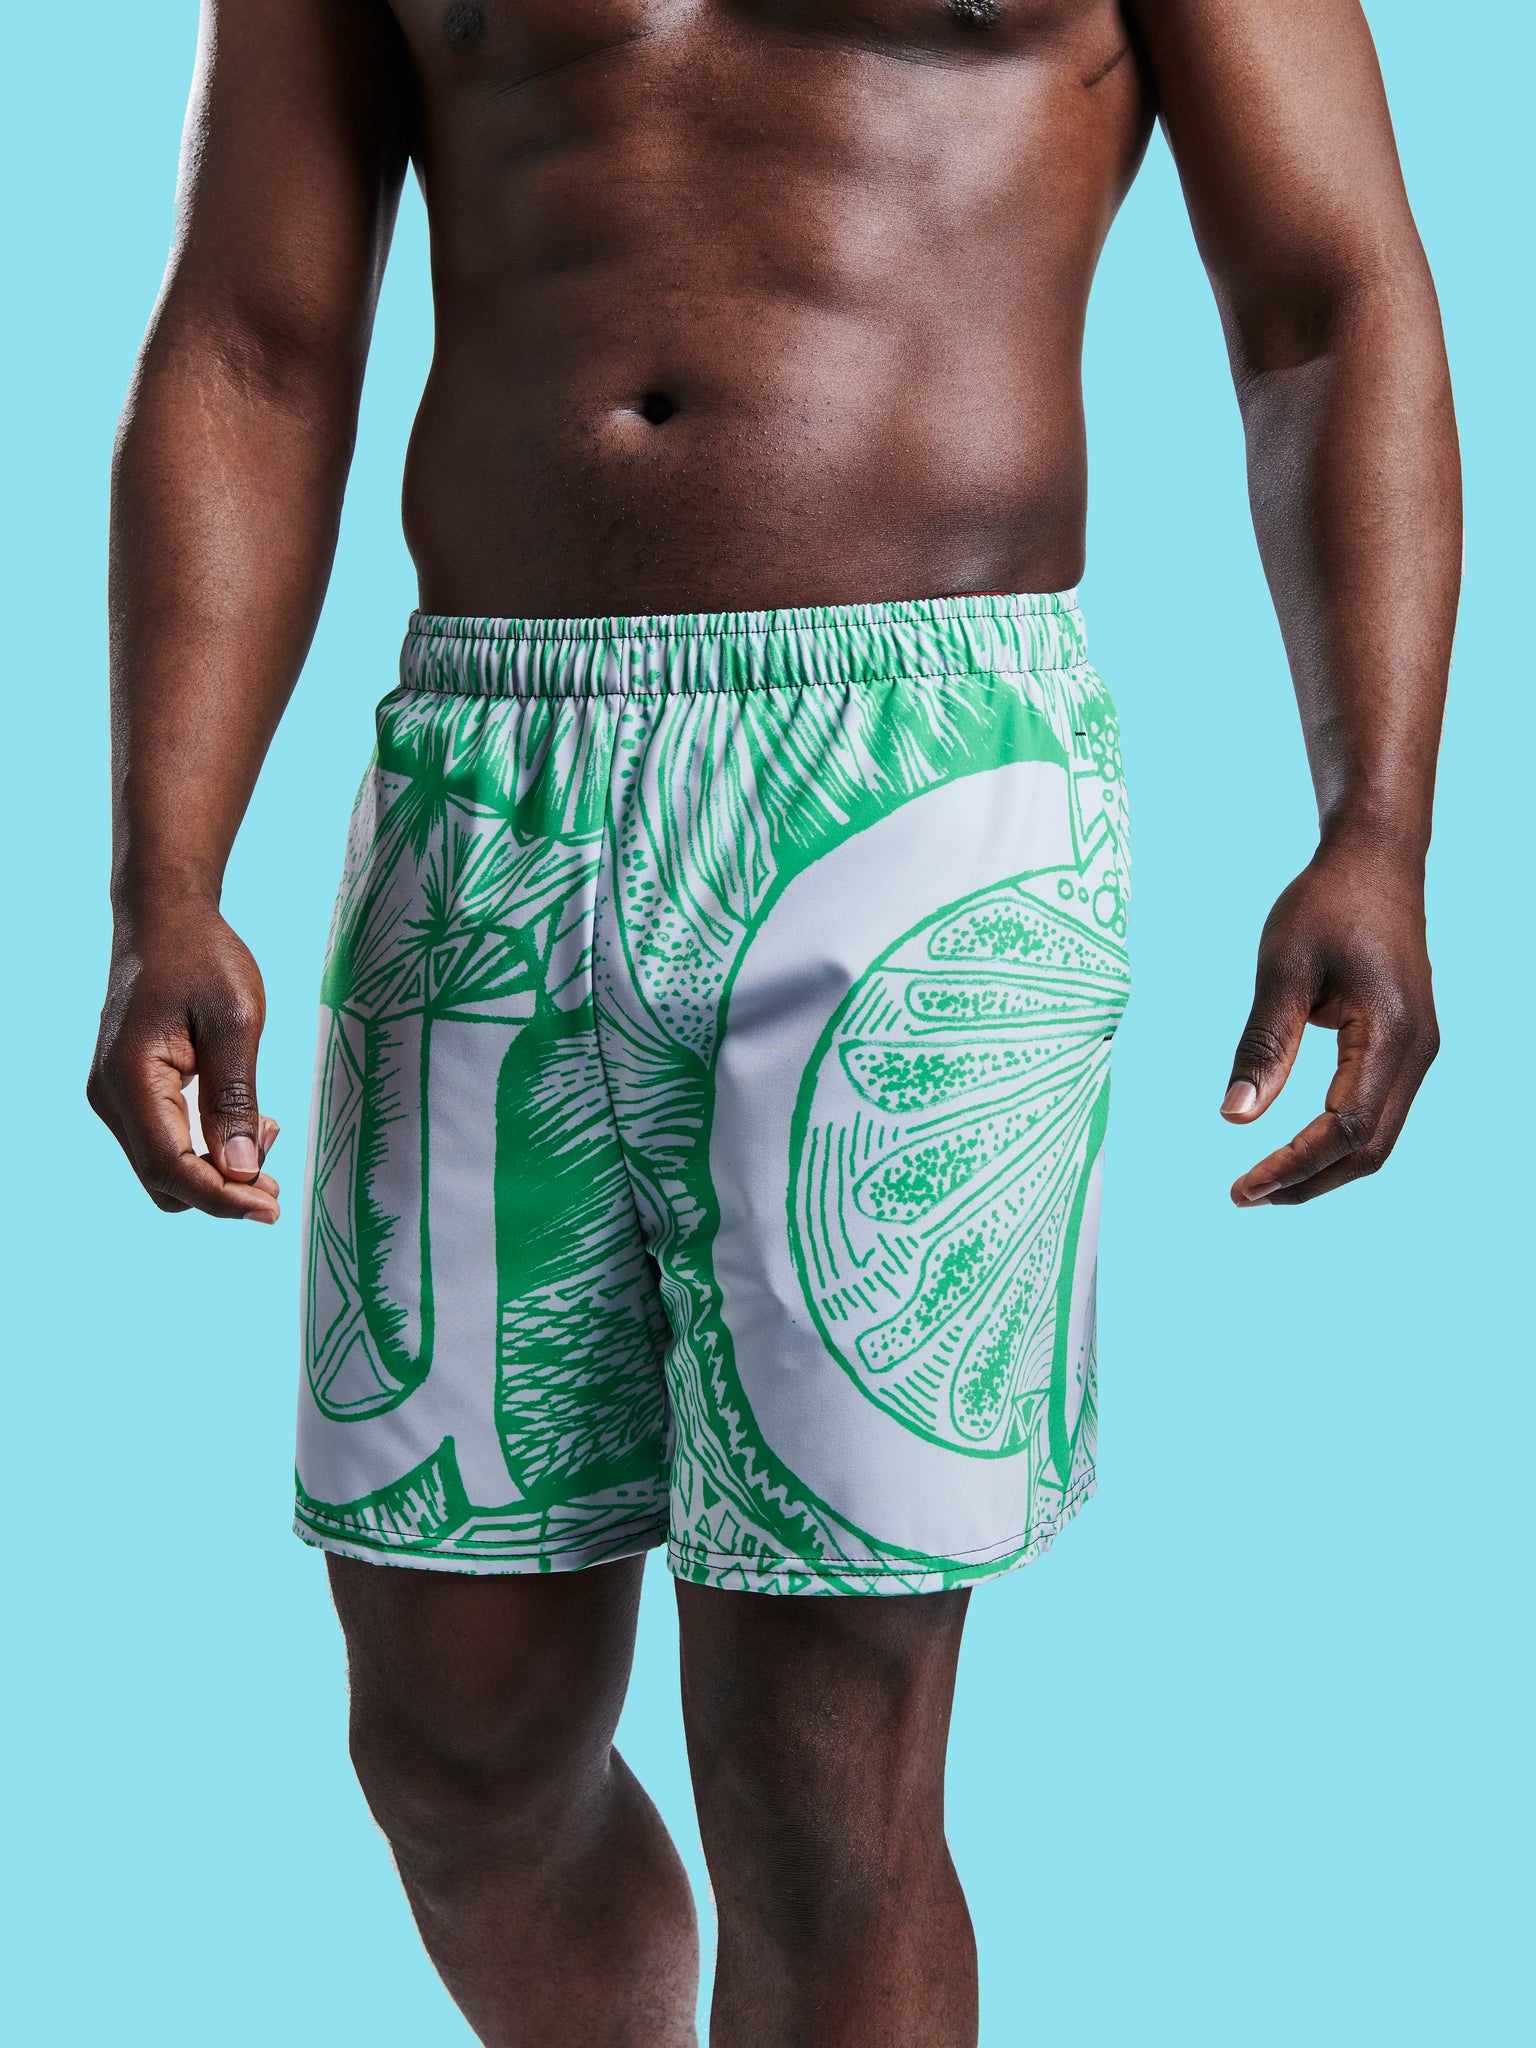 COURAGE Emerald Green - Recycled Athletic Shorts (Unisex )